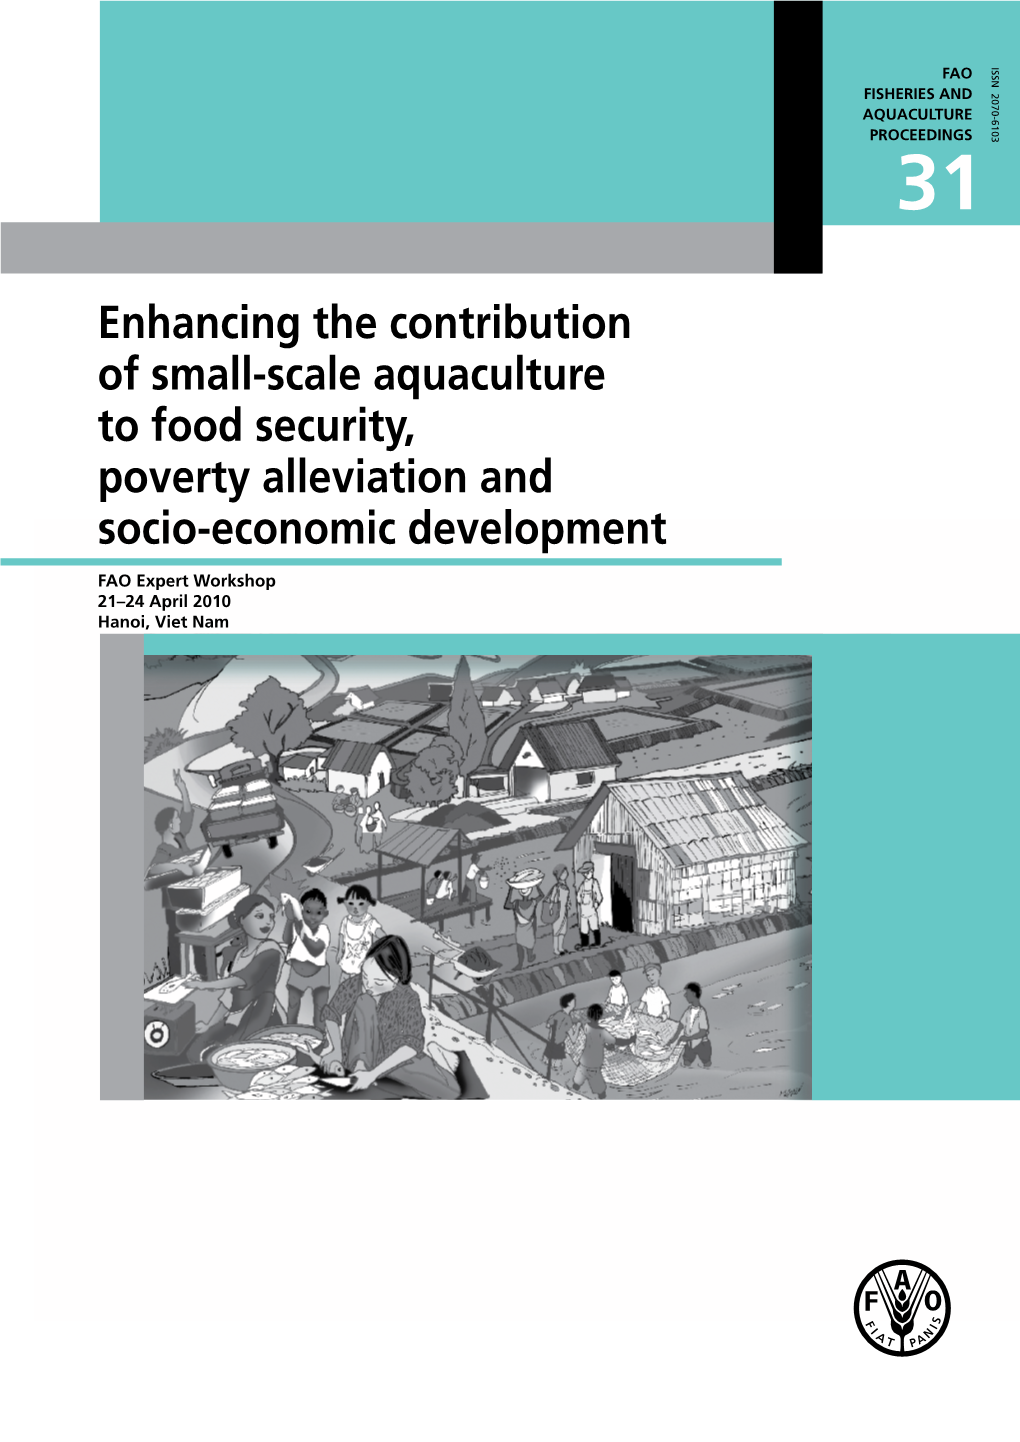 Enhancing the Contribution of Small-Scale Aquaculture to Food Security, Poverty Alleviation and Socio-Economic Development 31